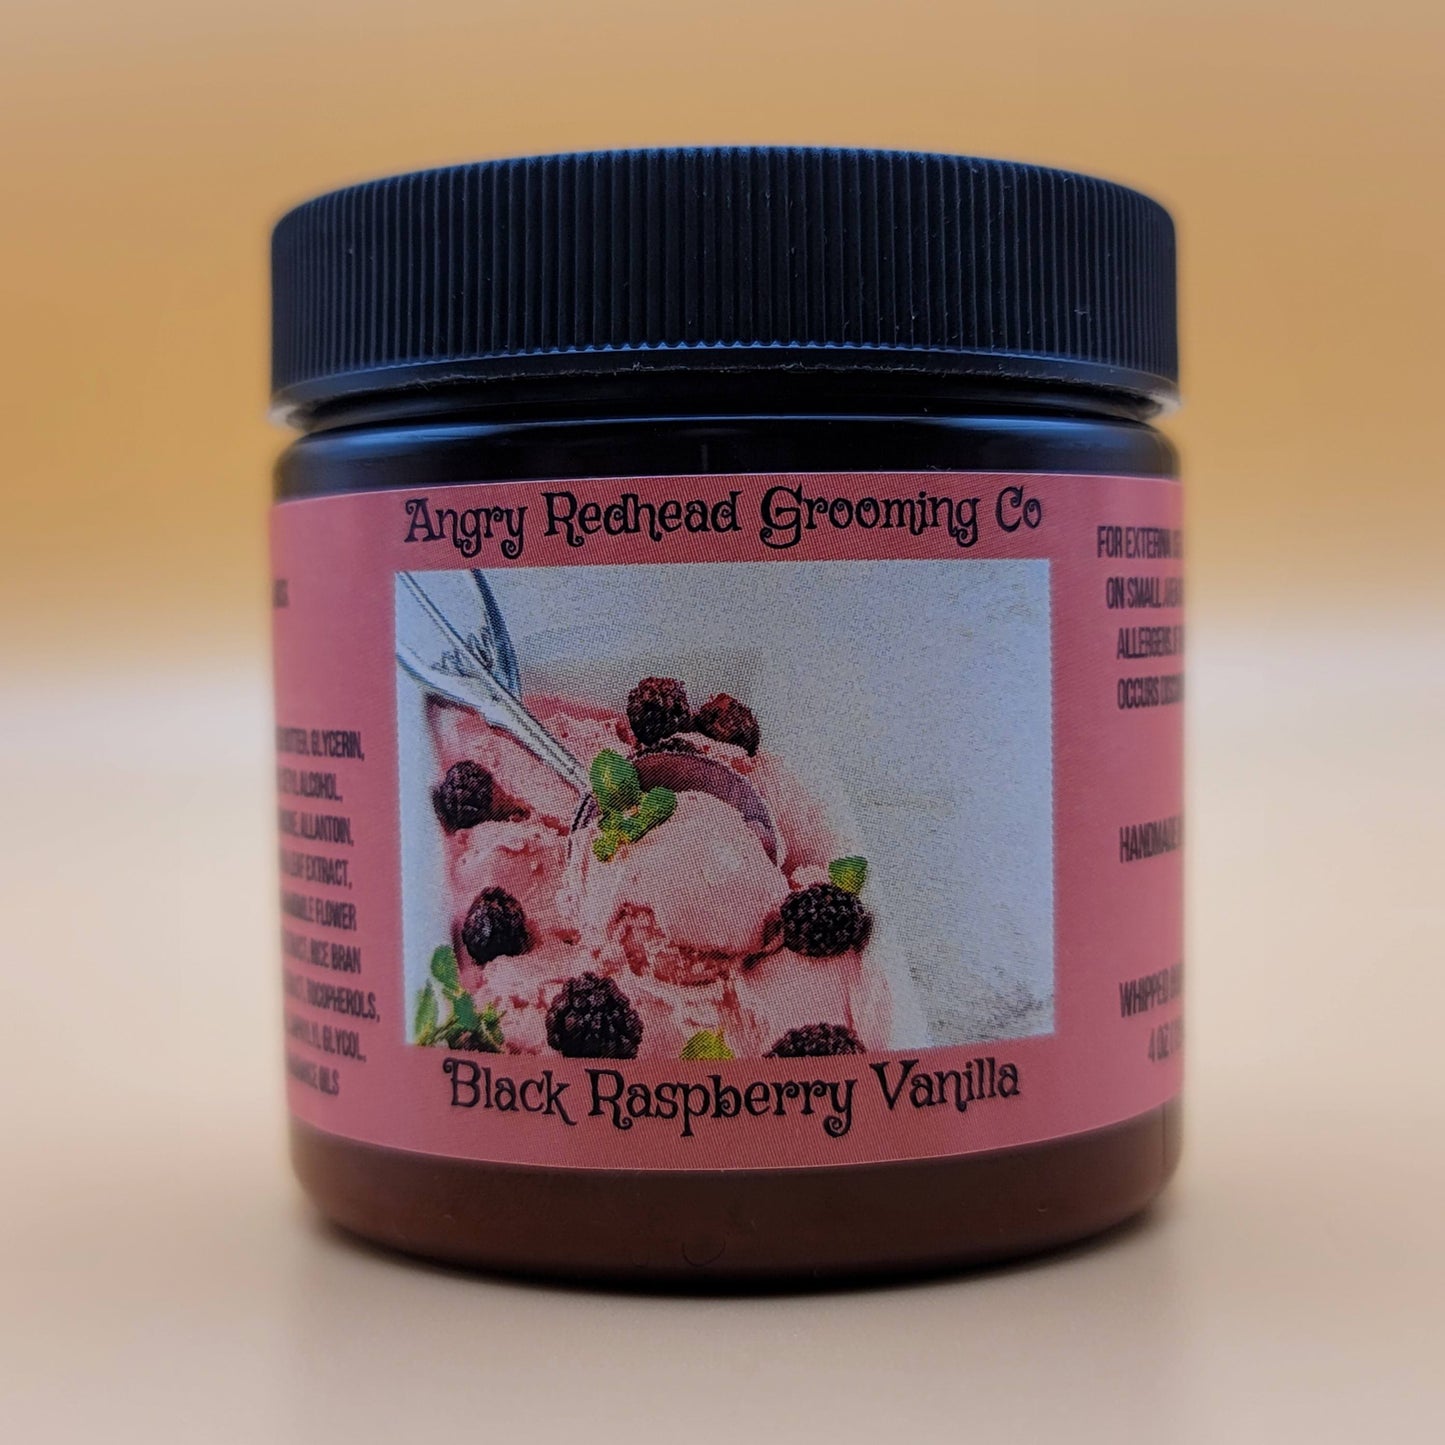 Black Raspberry Vanilla Body Butter by Angry Redhead Grooming Co - angryredheadgrooming.com